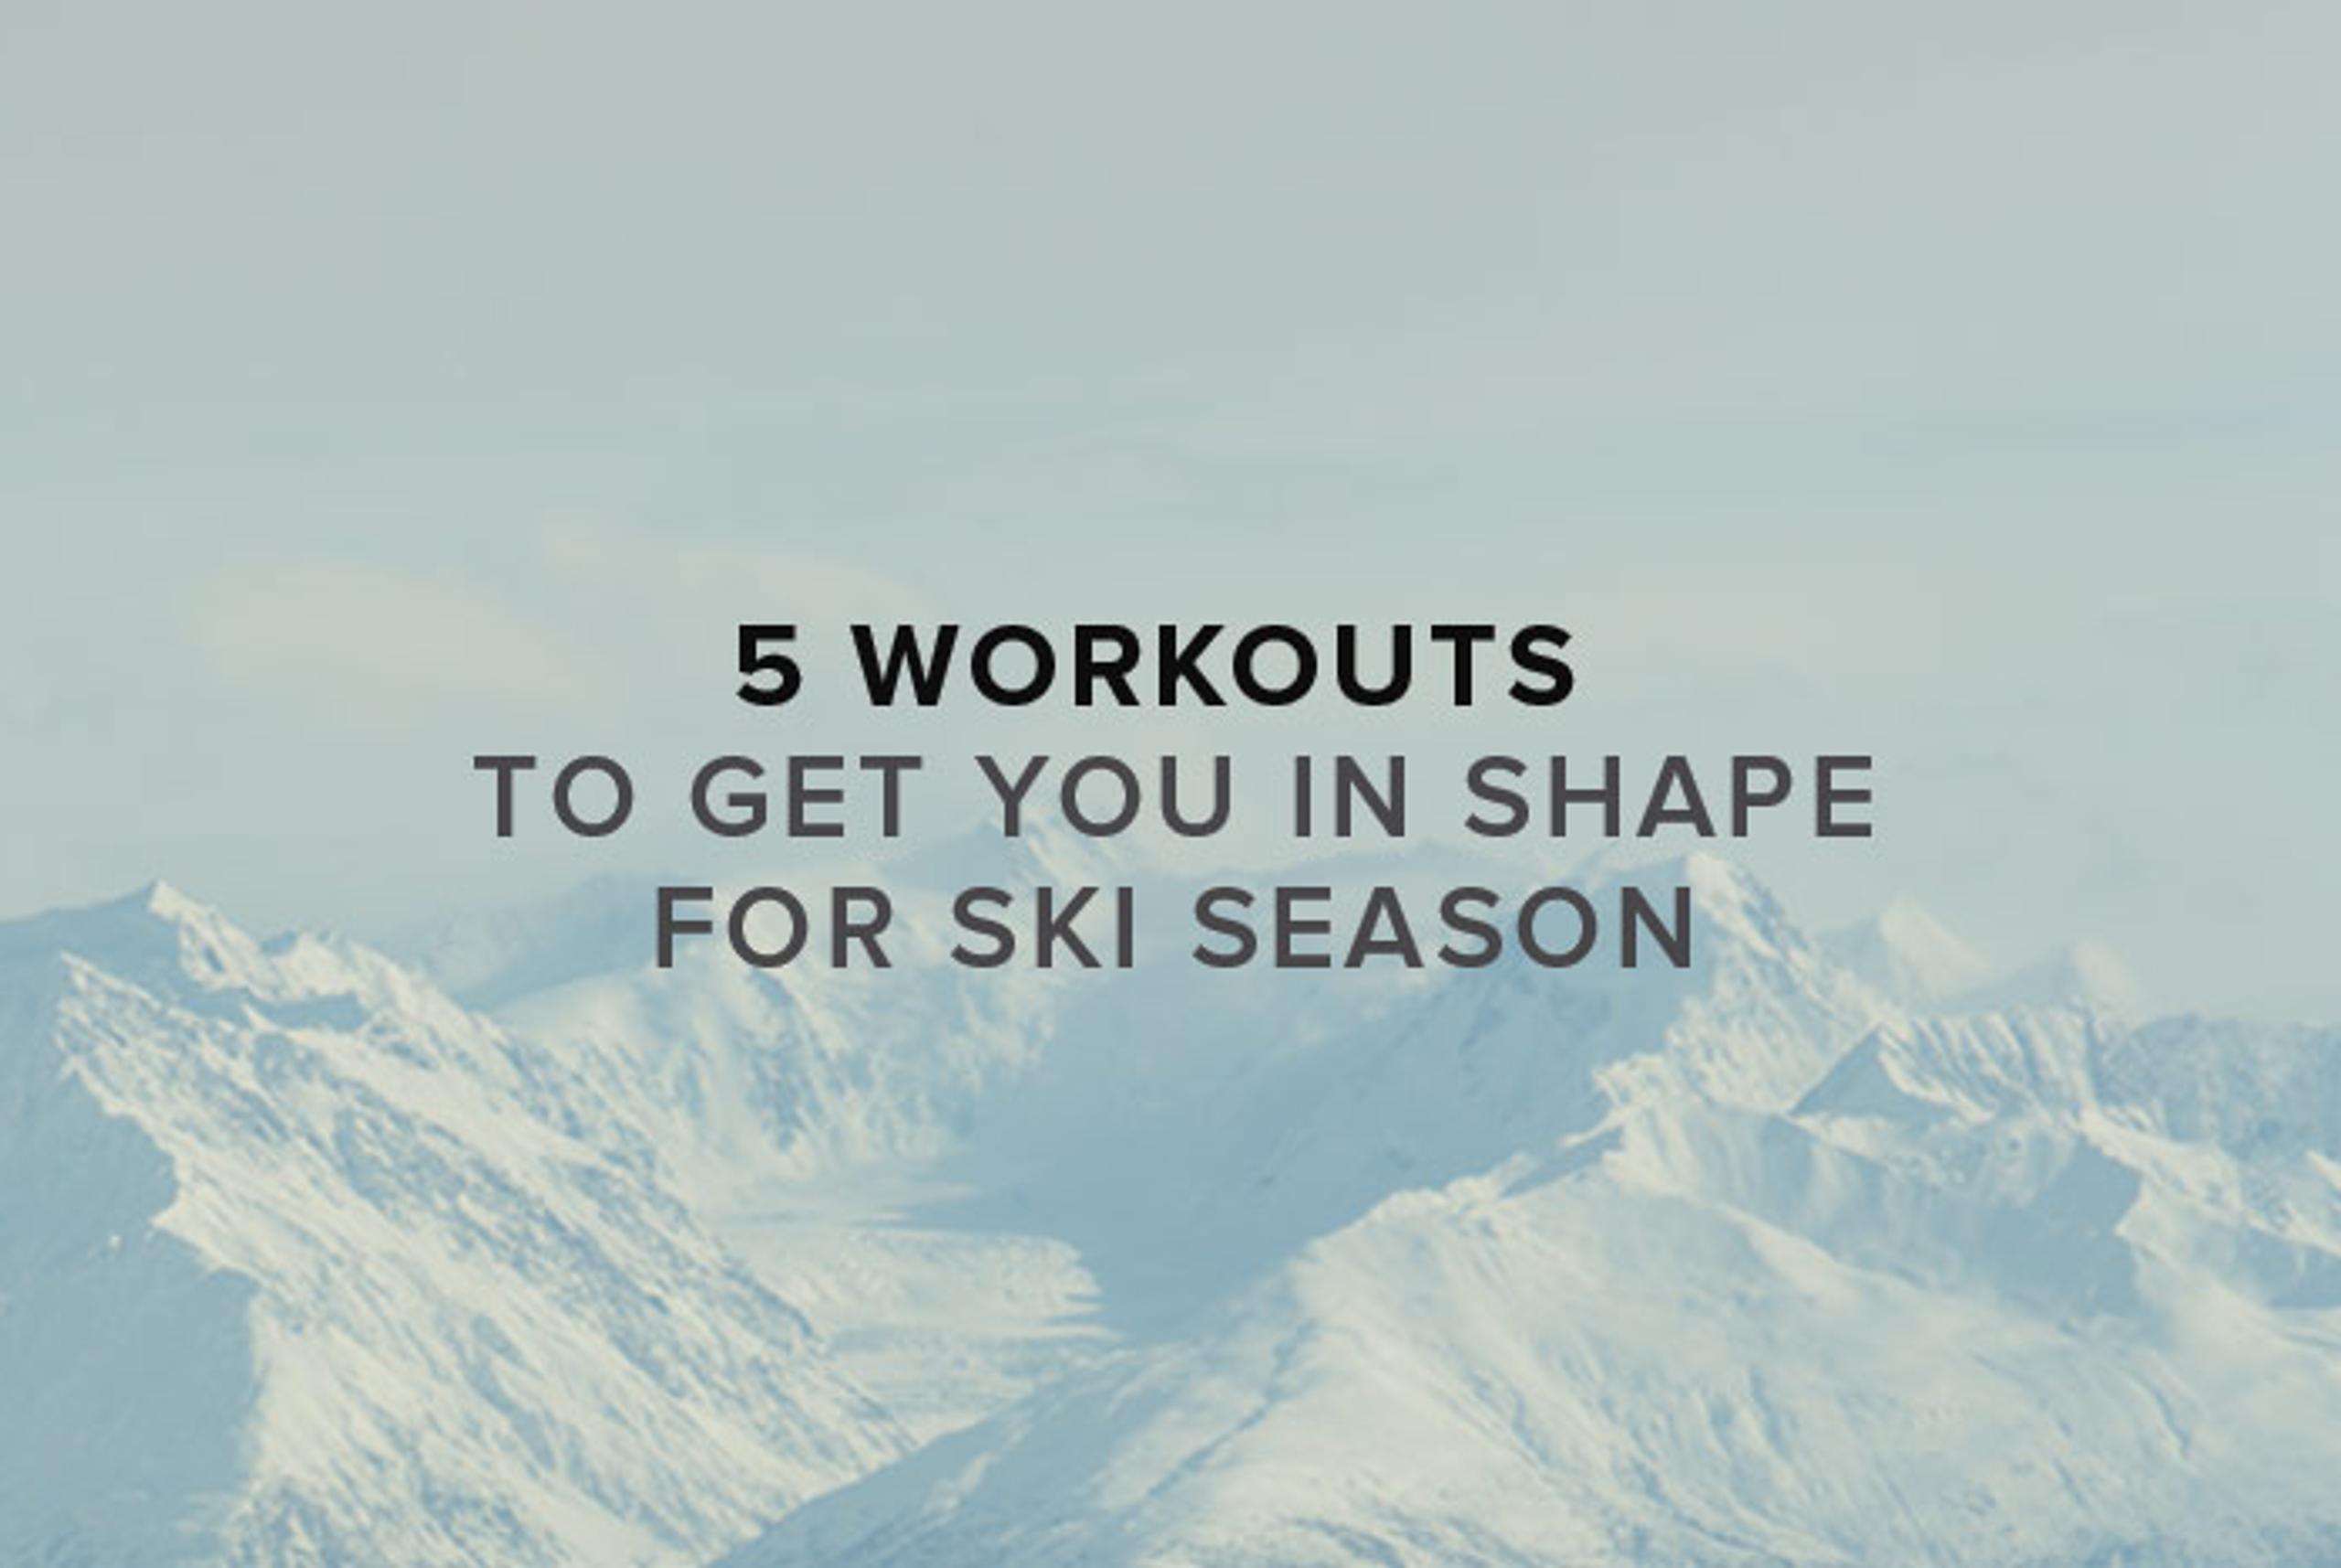 text graphic reading "5 workouts to get you in shape for ski season"